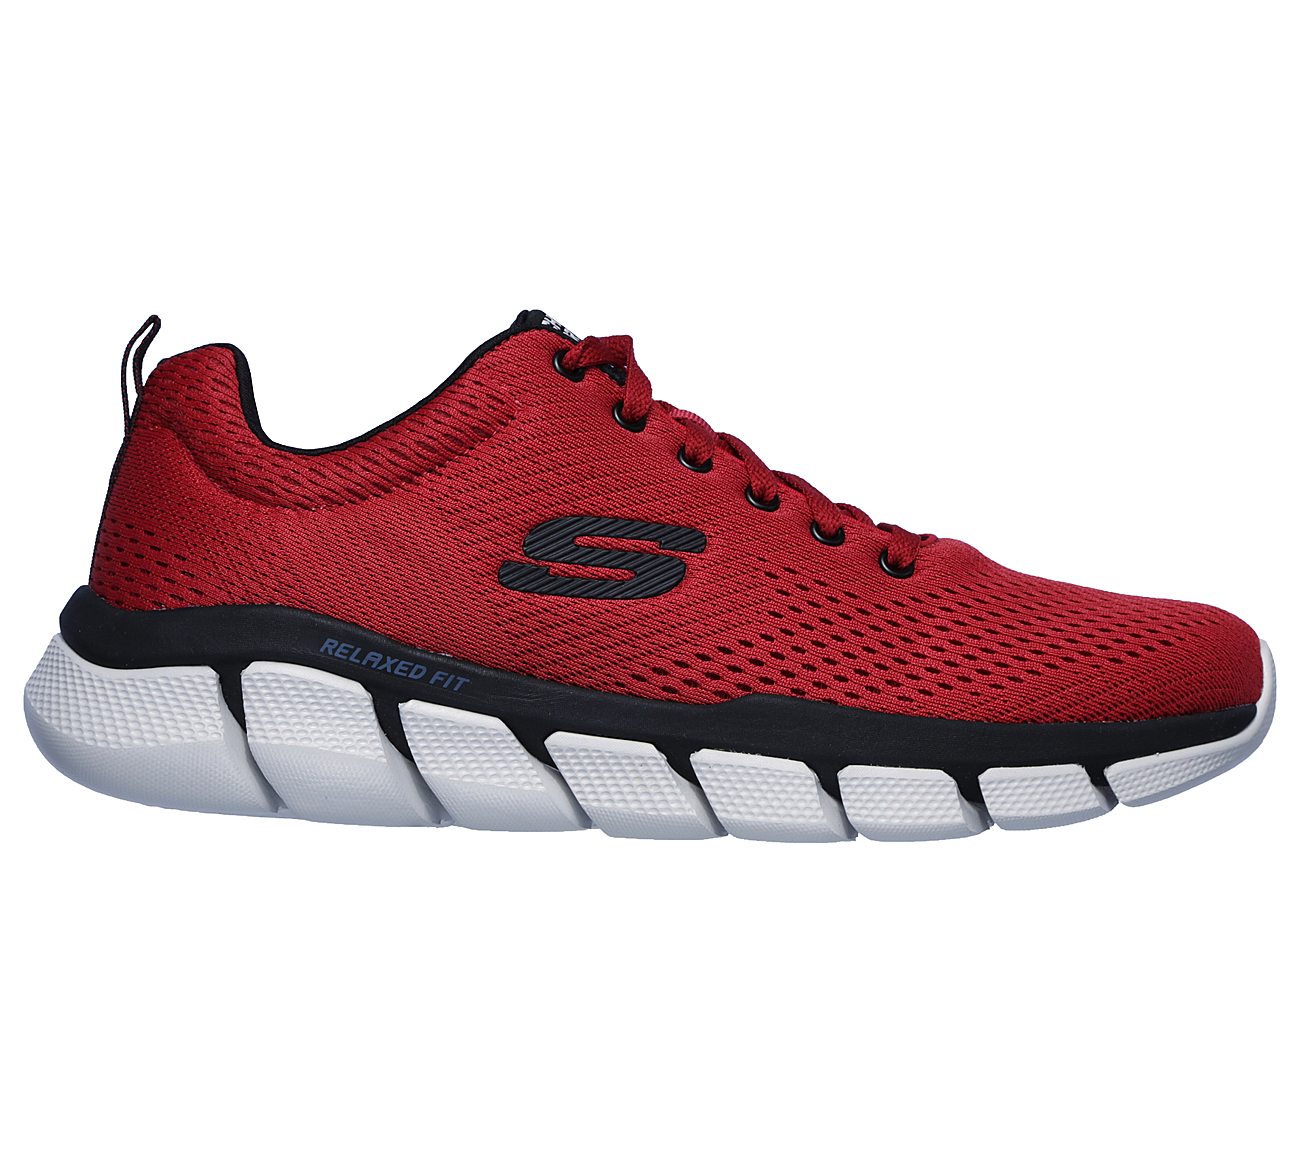 Buy SKECHERS Relaxed Fit: Skech-Flex 3.0 - Verko Relaxed Fit Shoes